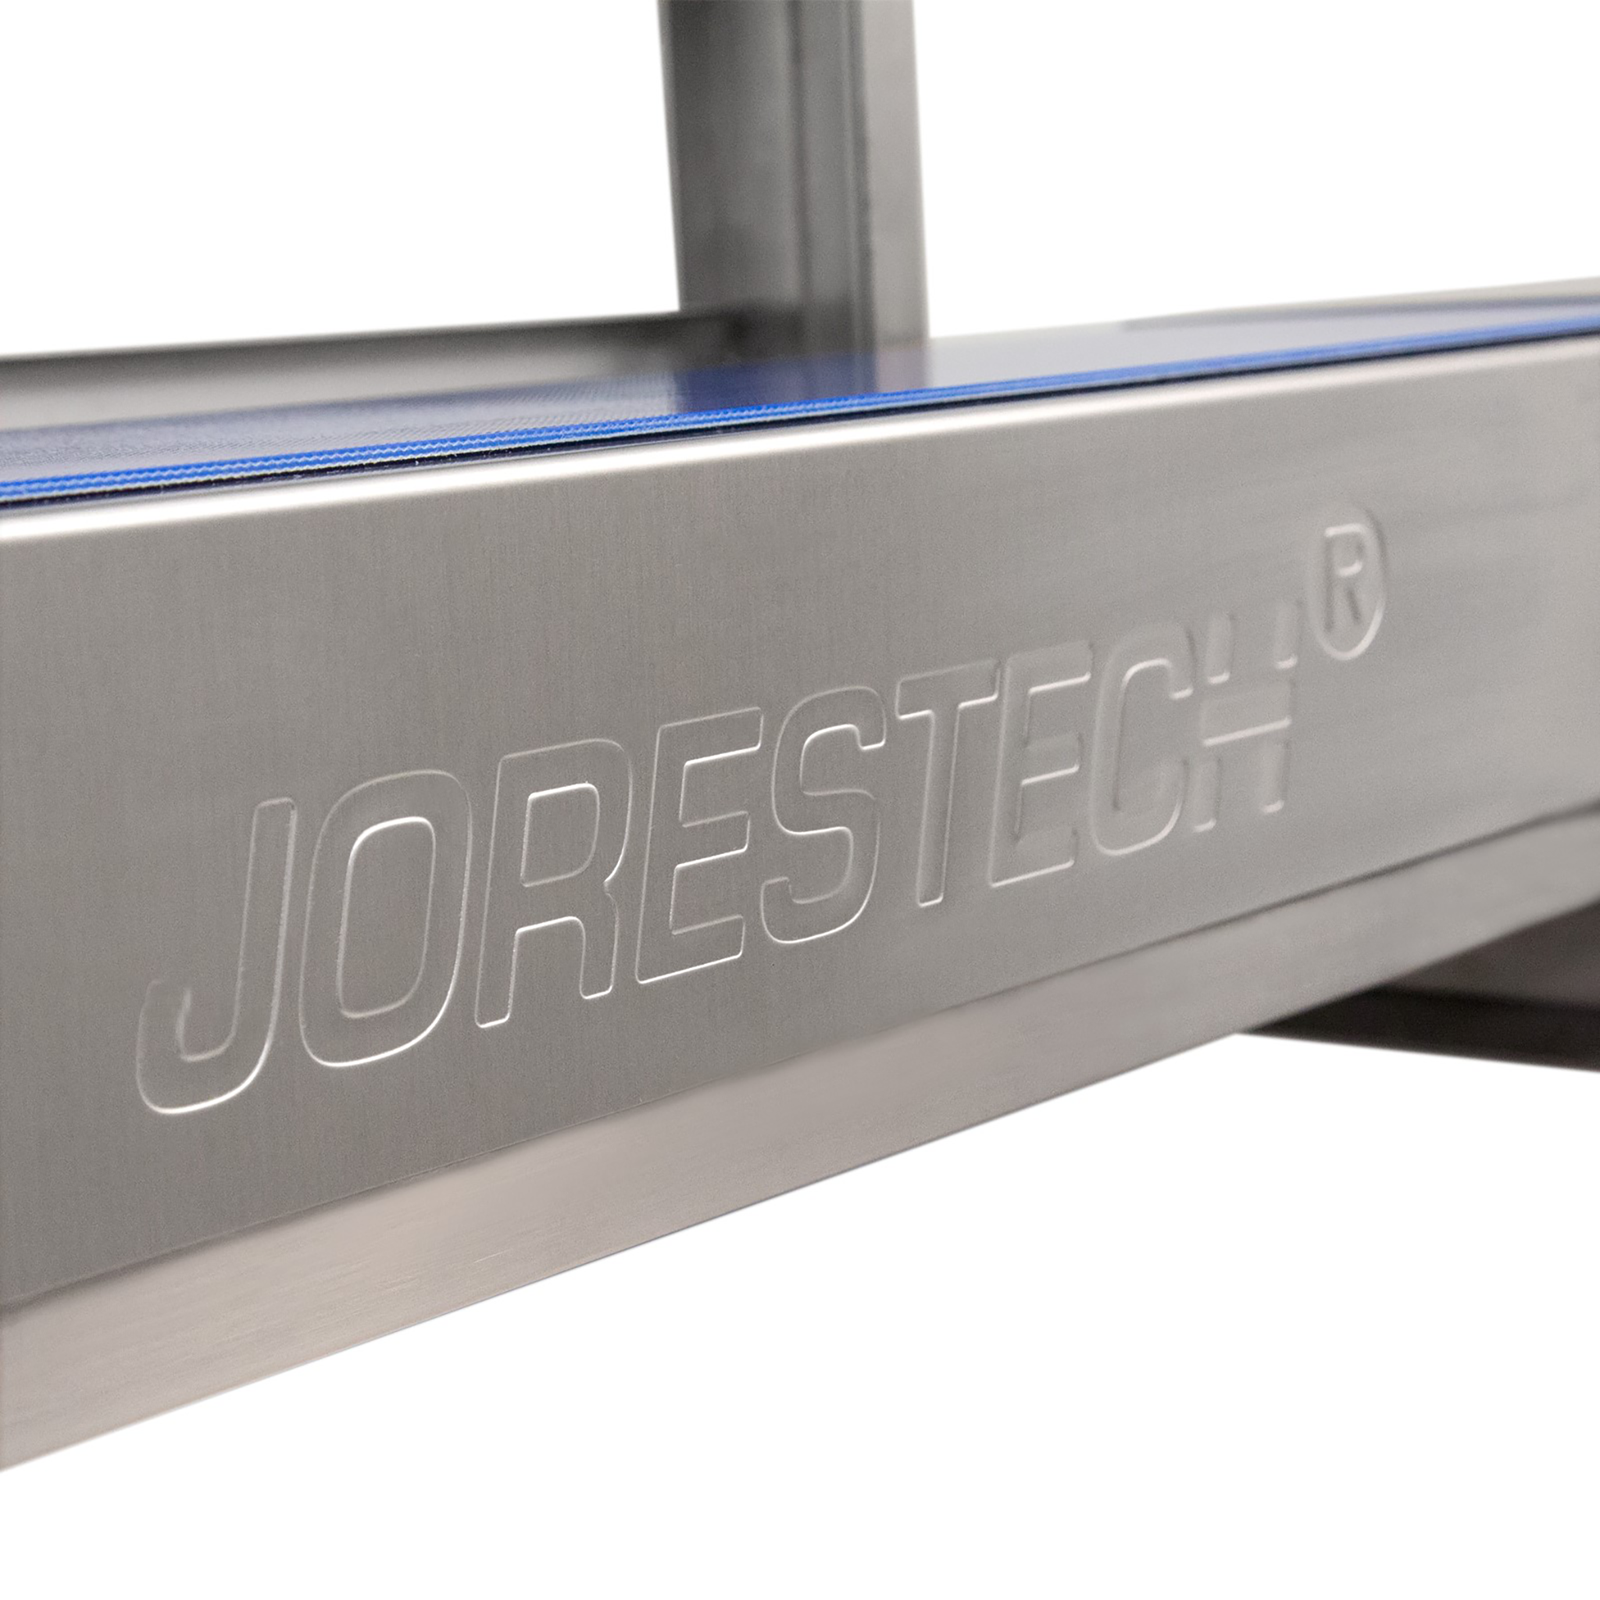 JORES TECHNOLOGIES® logo embossed on a table top continuous band sealer